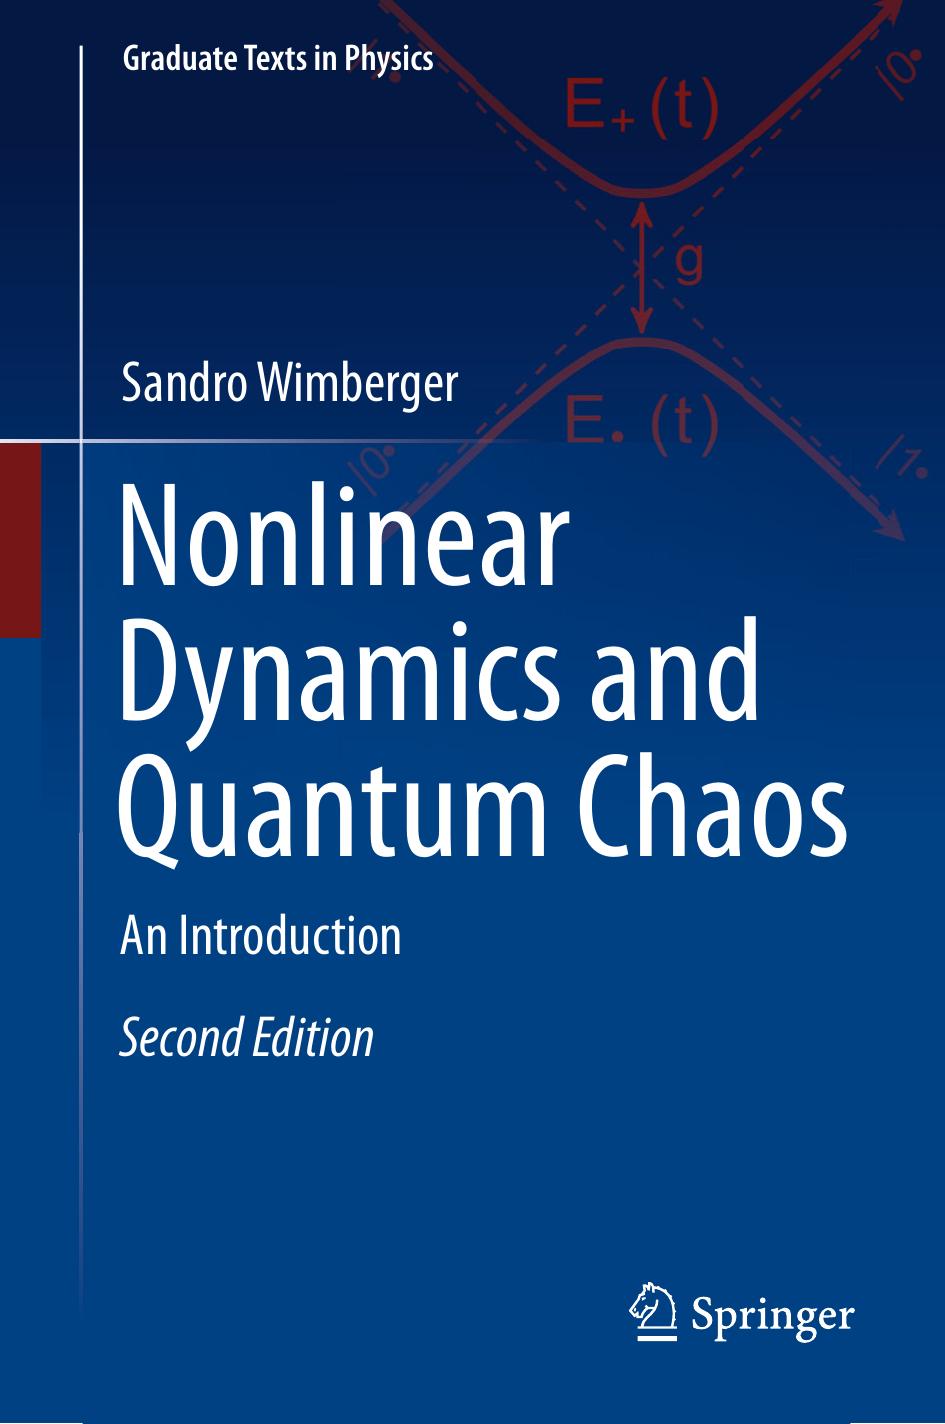 Nonlinear Dynamics and Quantum Chaos - An Introduction by Sandro Wimberger